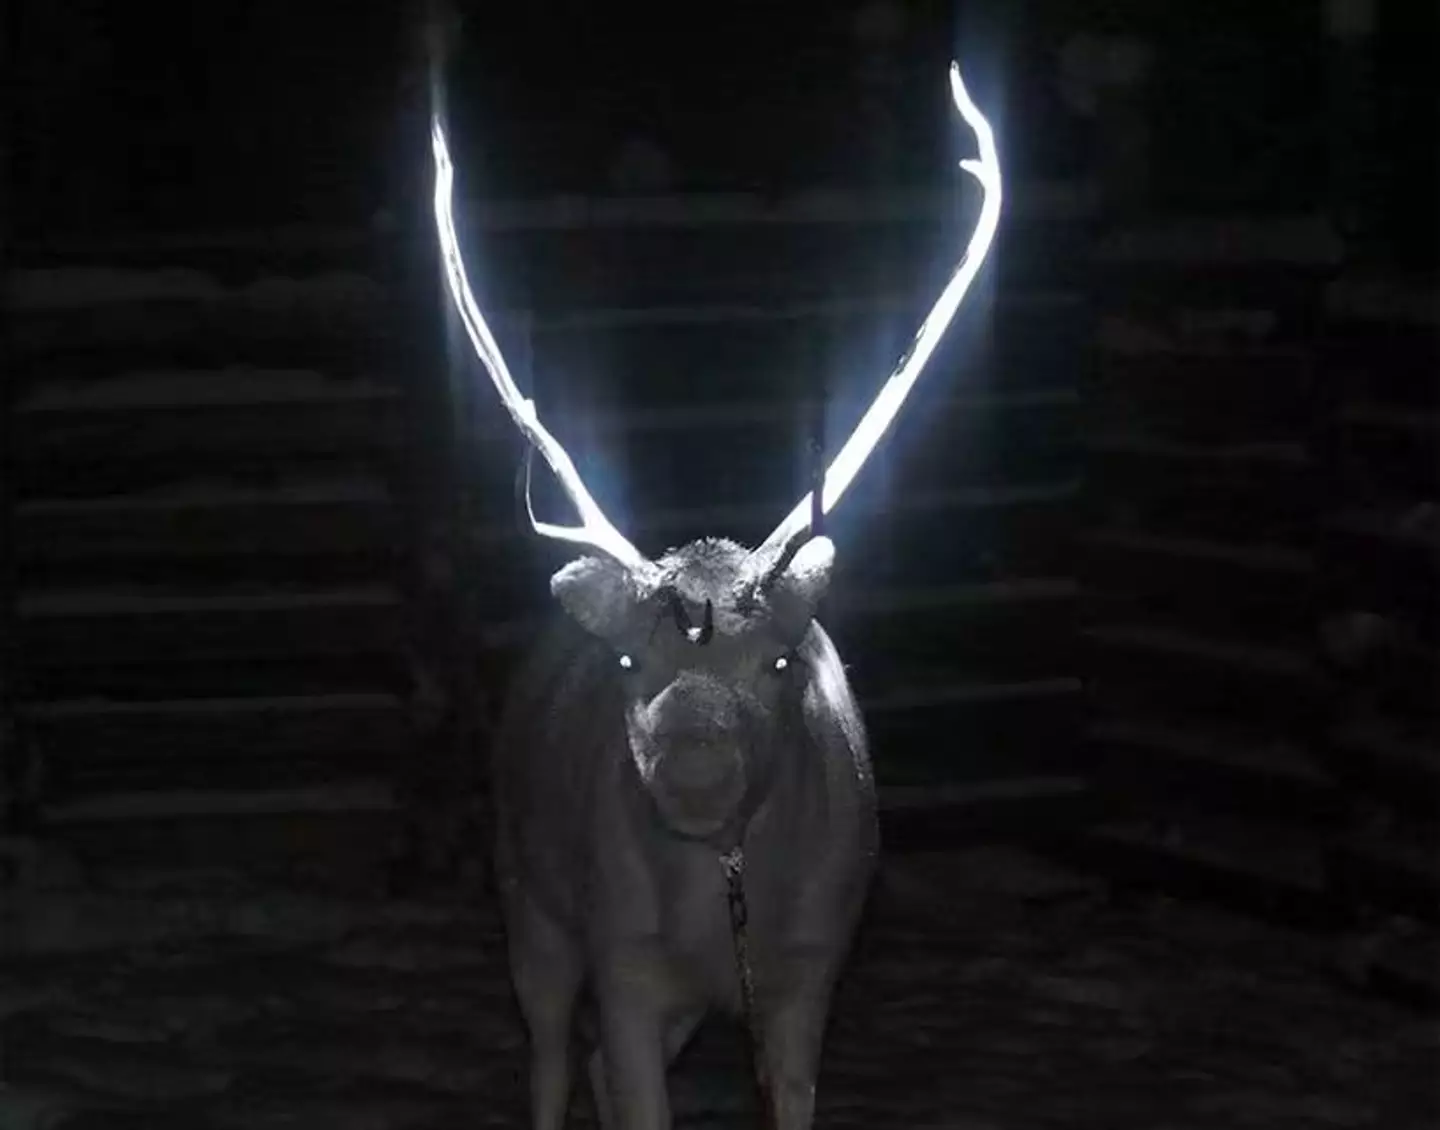 People reckon the real reason the reindeers antlers were glowing in the dark is quite terrifying (X/@AMAZlNGNATURE)